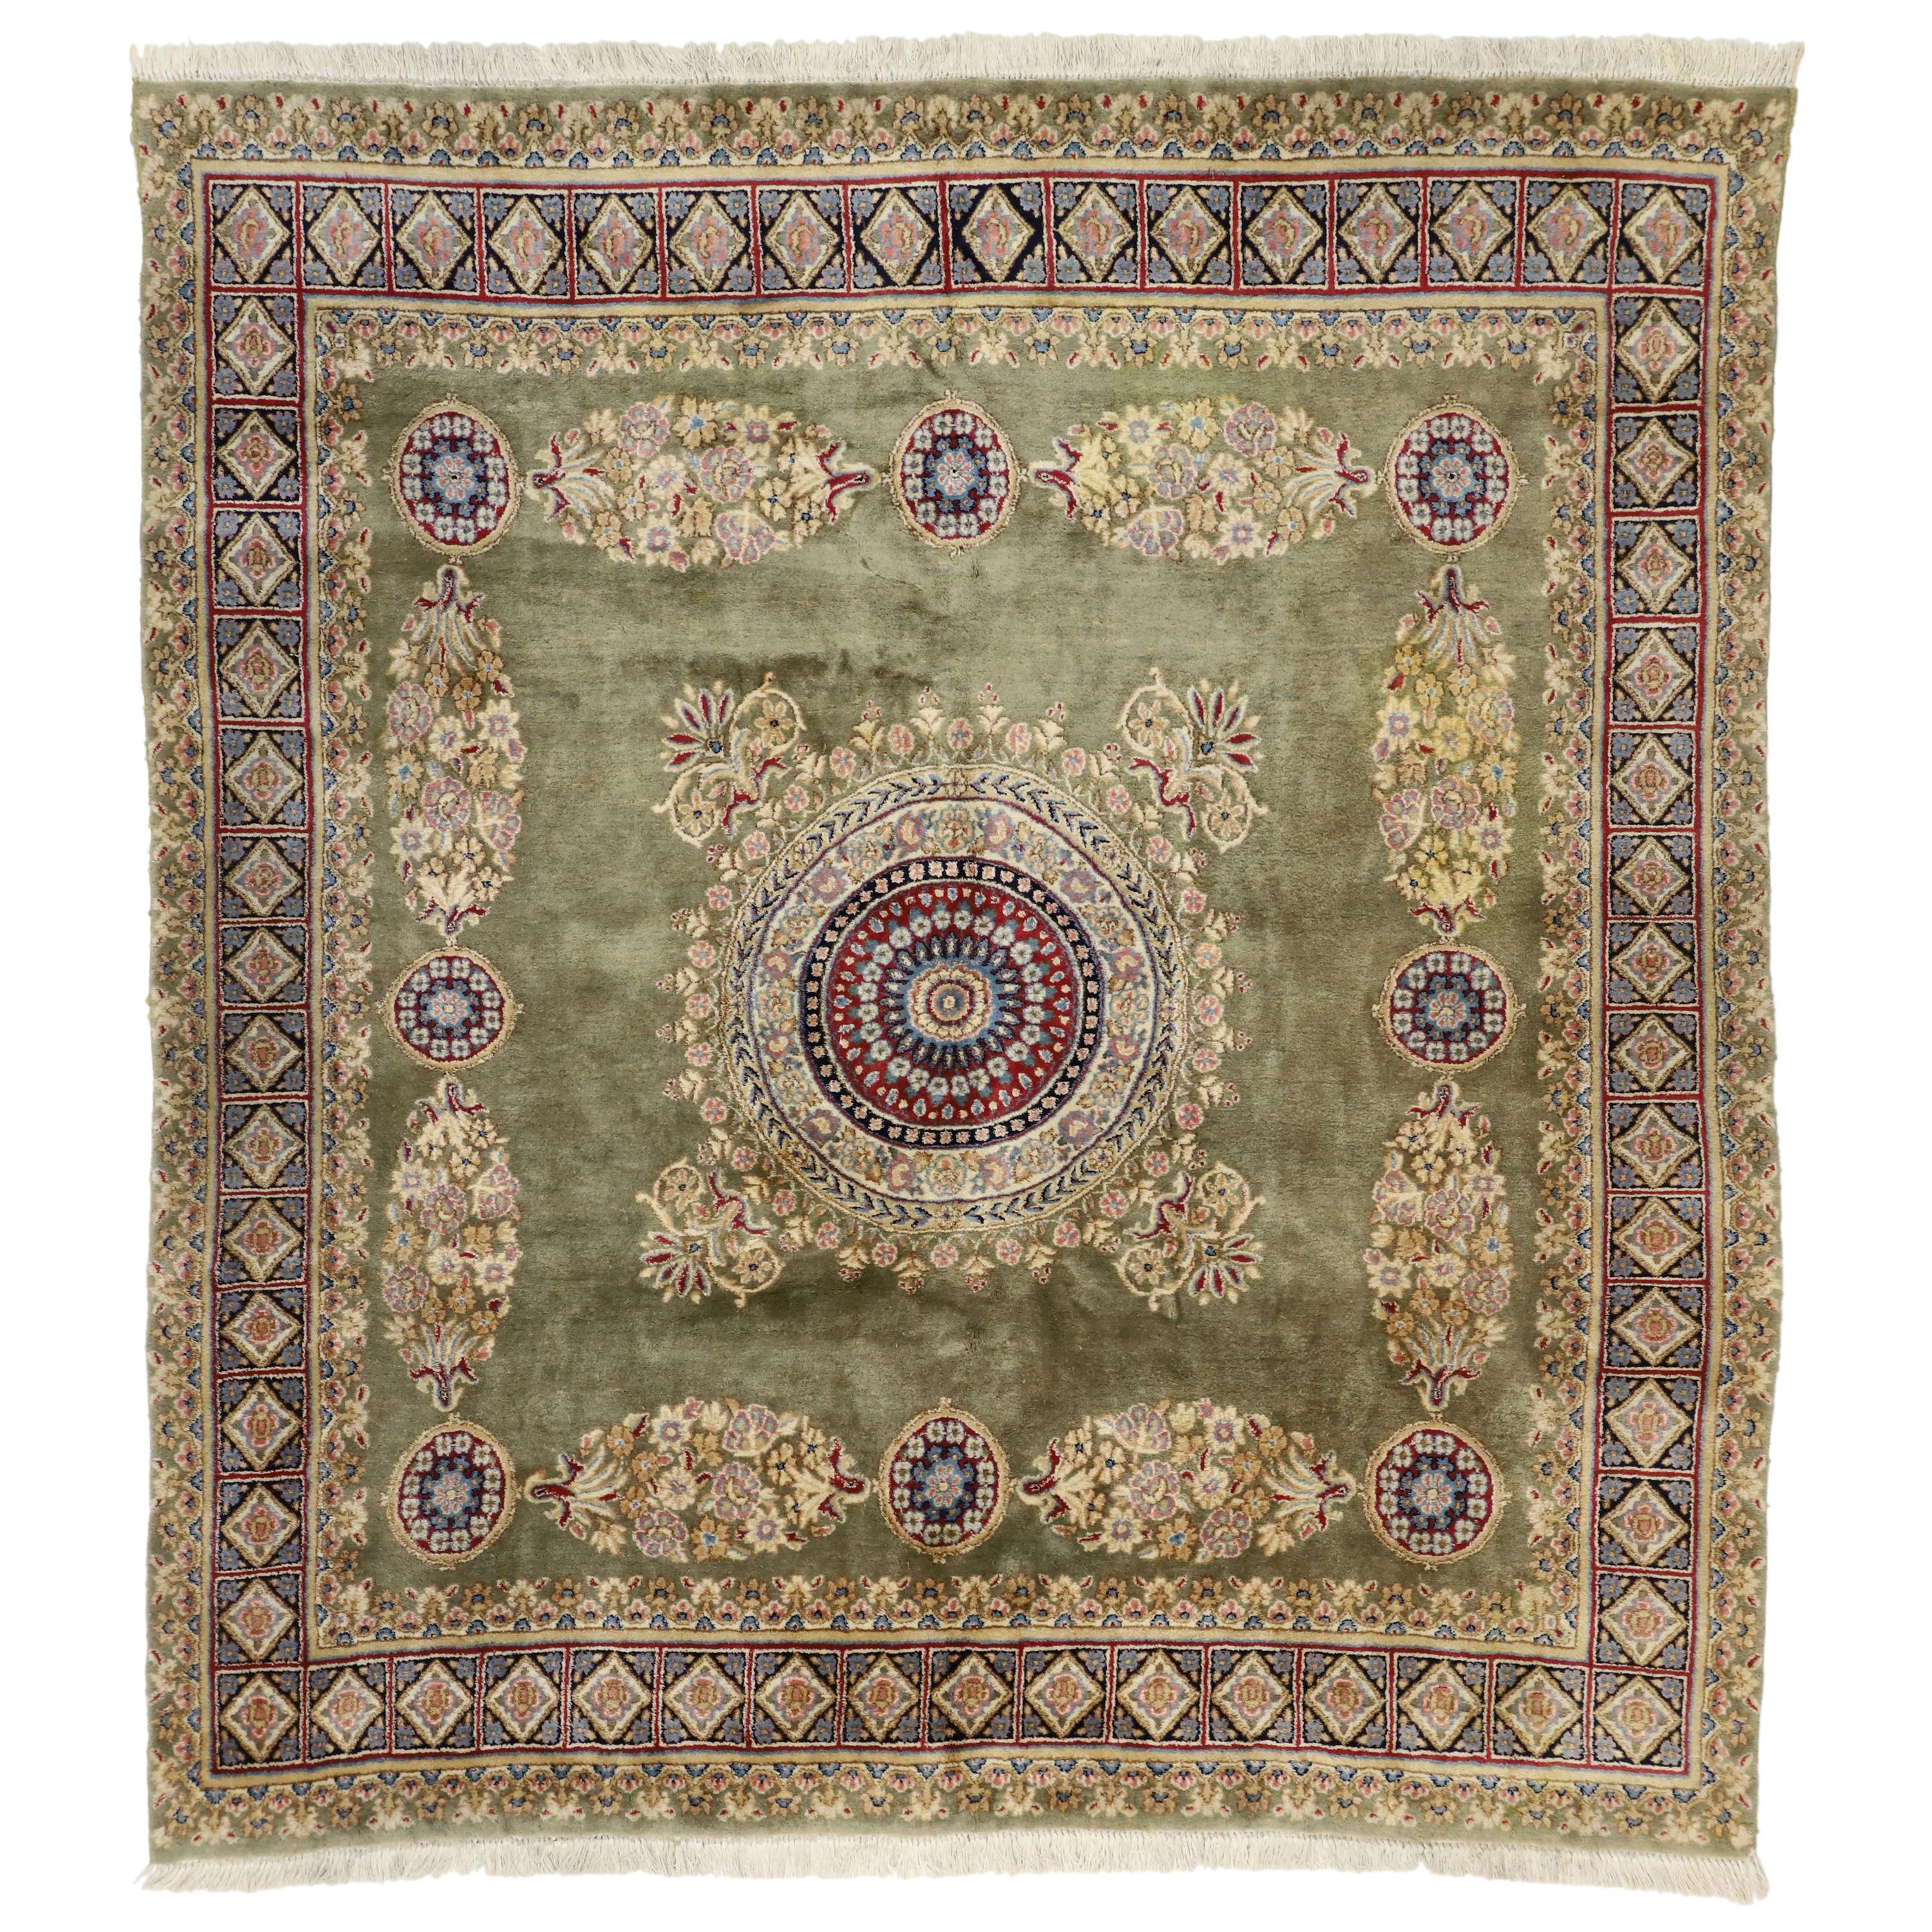 Vintage Persian Kerman Square Area Rug with Elizabethan and Georgian Style